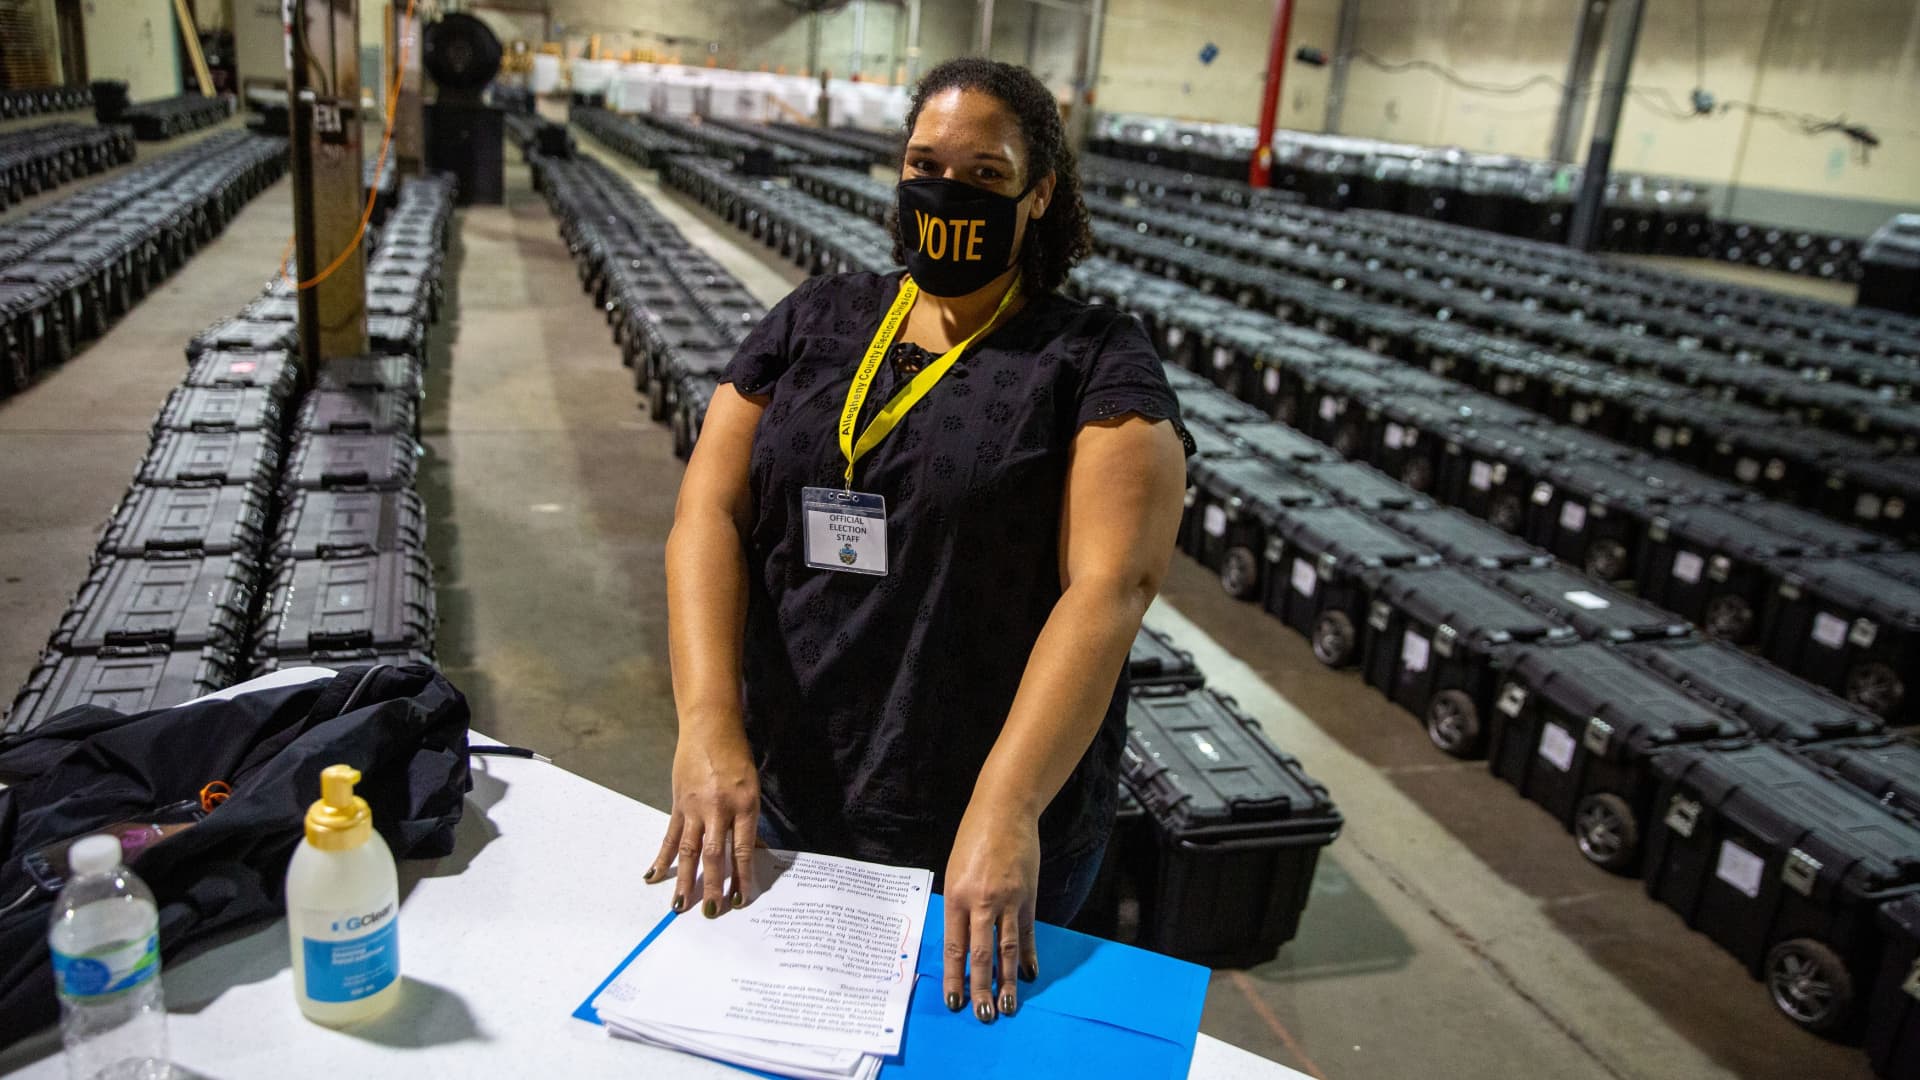 Poll worker Angela Steele mans the check-in desk near rows of empty ballot boxes at the Allegheny County Election Warehouse after the election in Pittsburgh, Pennsylvania, U.S. November 6, 2020.